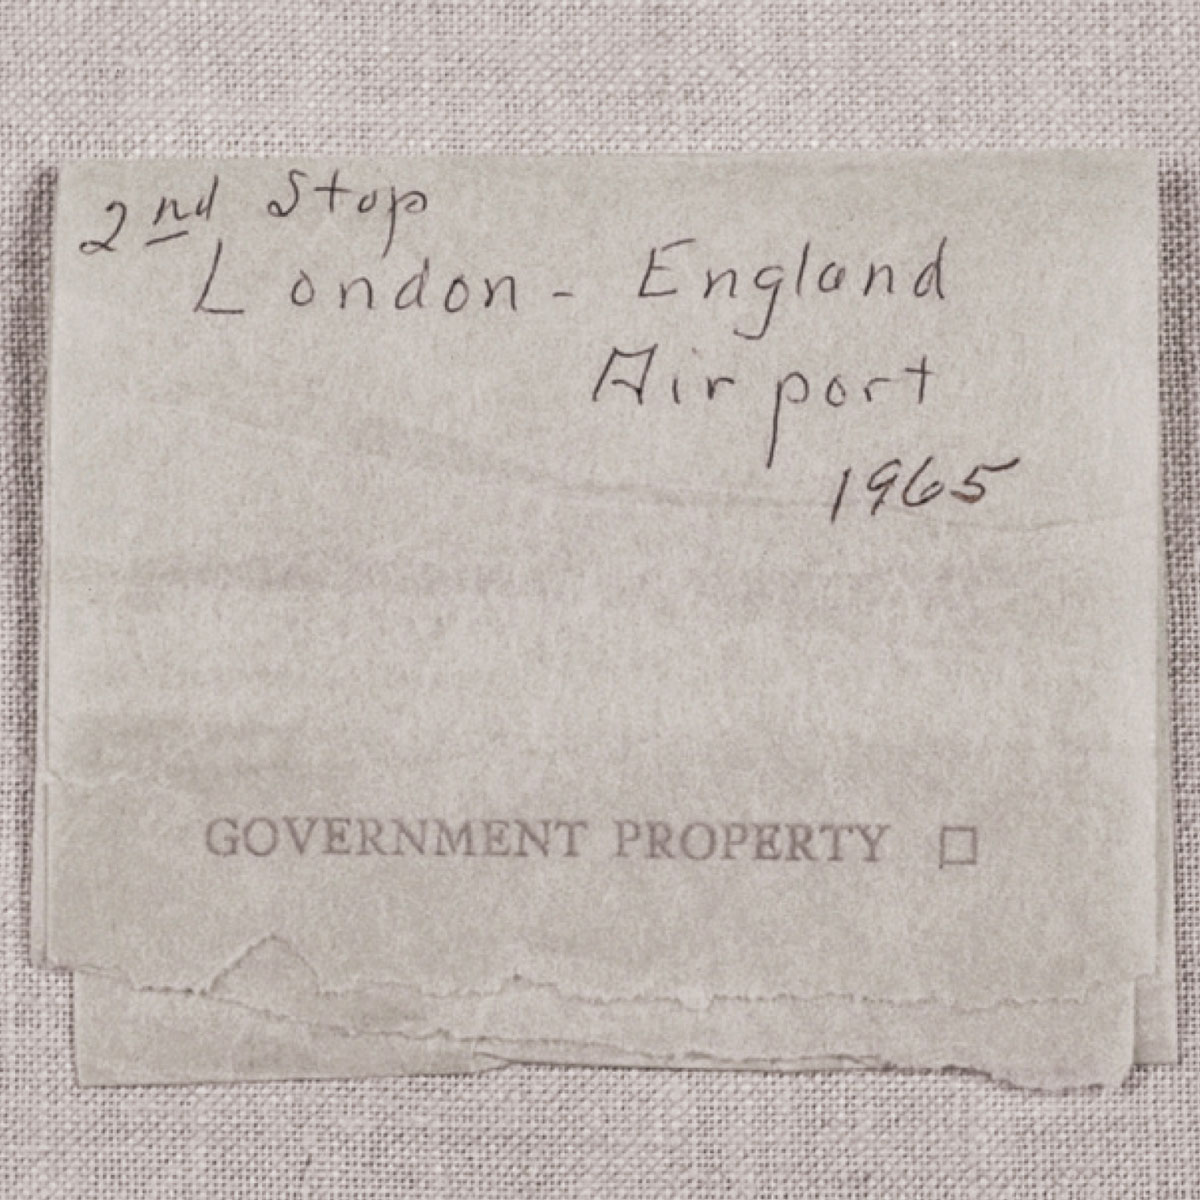 A piece of toilet paper annotated with the phrase: “2nd Stop London - England Airport 1965.”